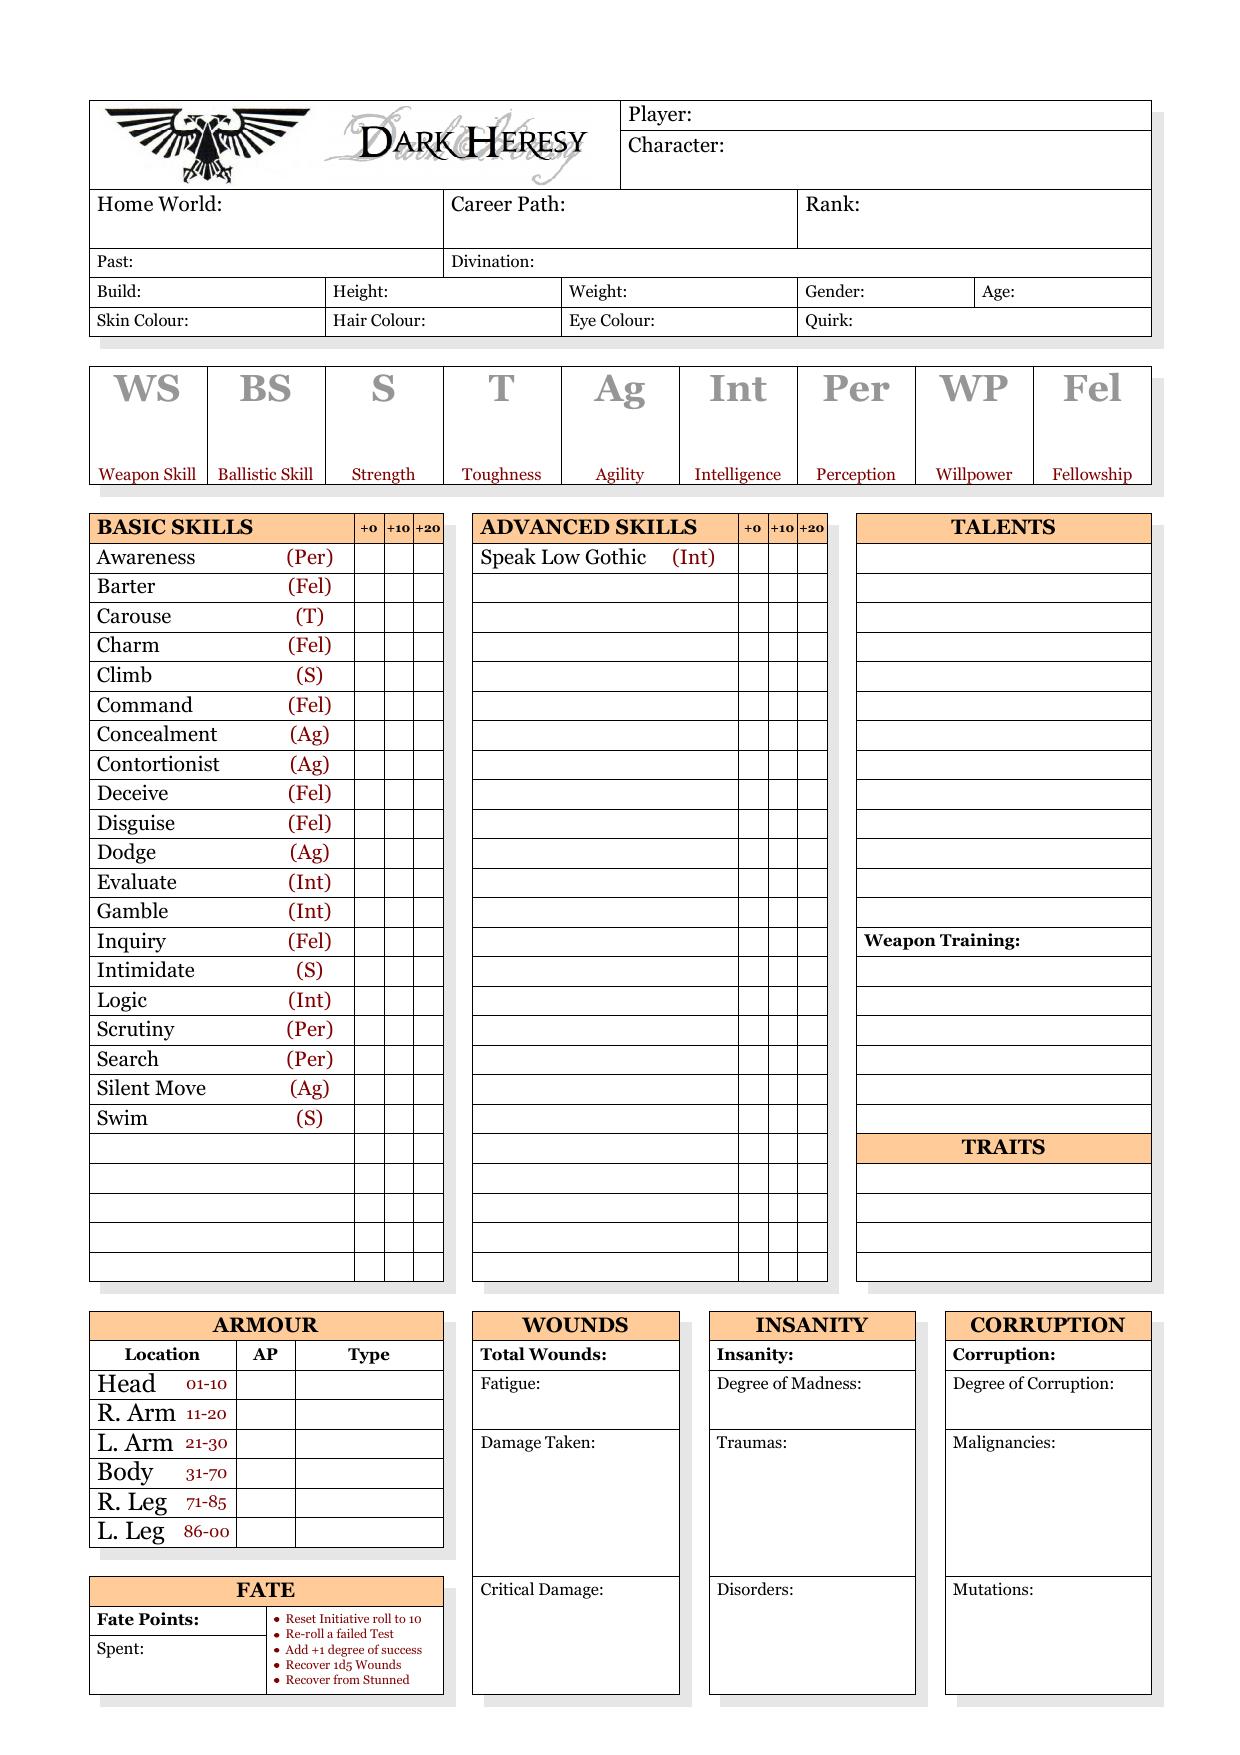 DH Character Sheet - 2 pages